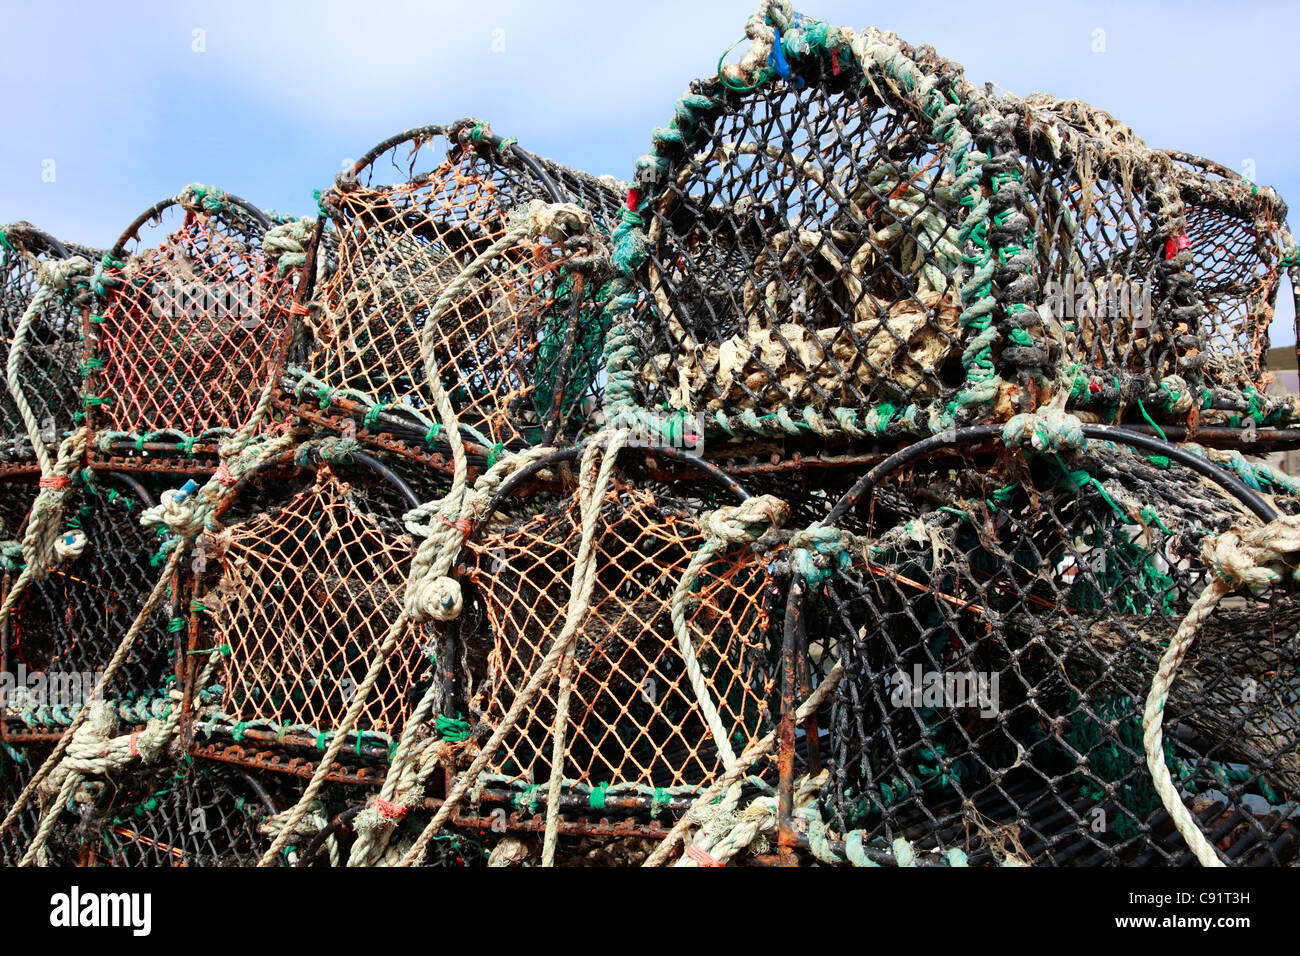 Lobster pots on the quay at Stromness on Orkney, Scotland. Stock Photo